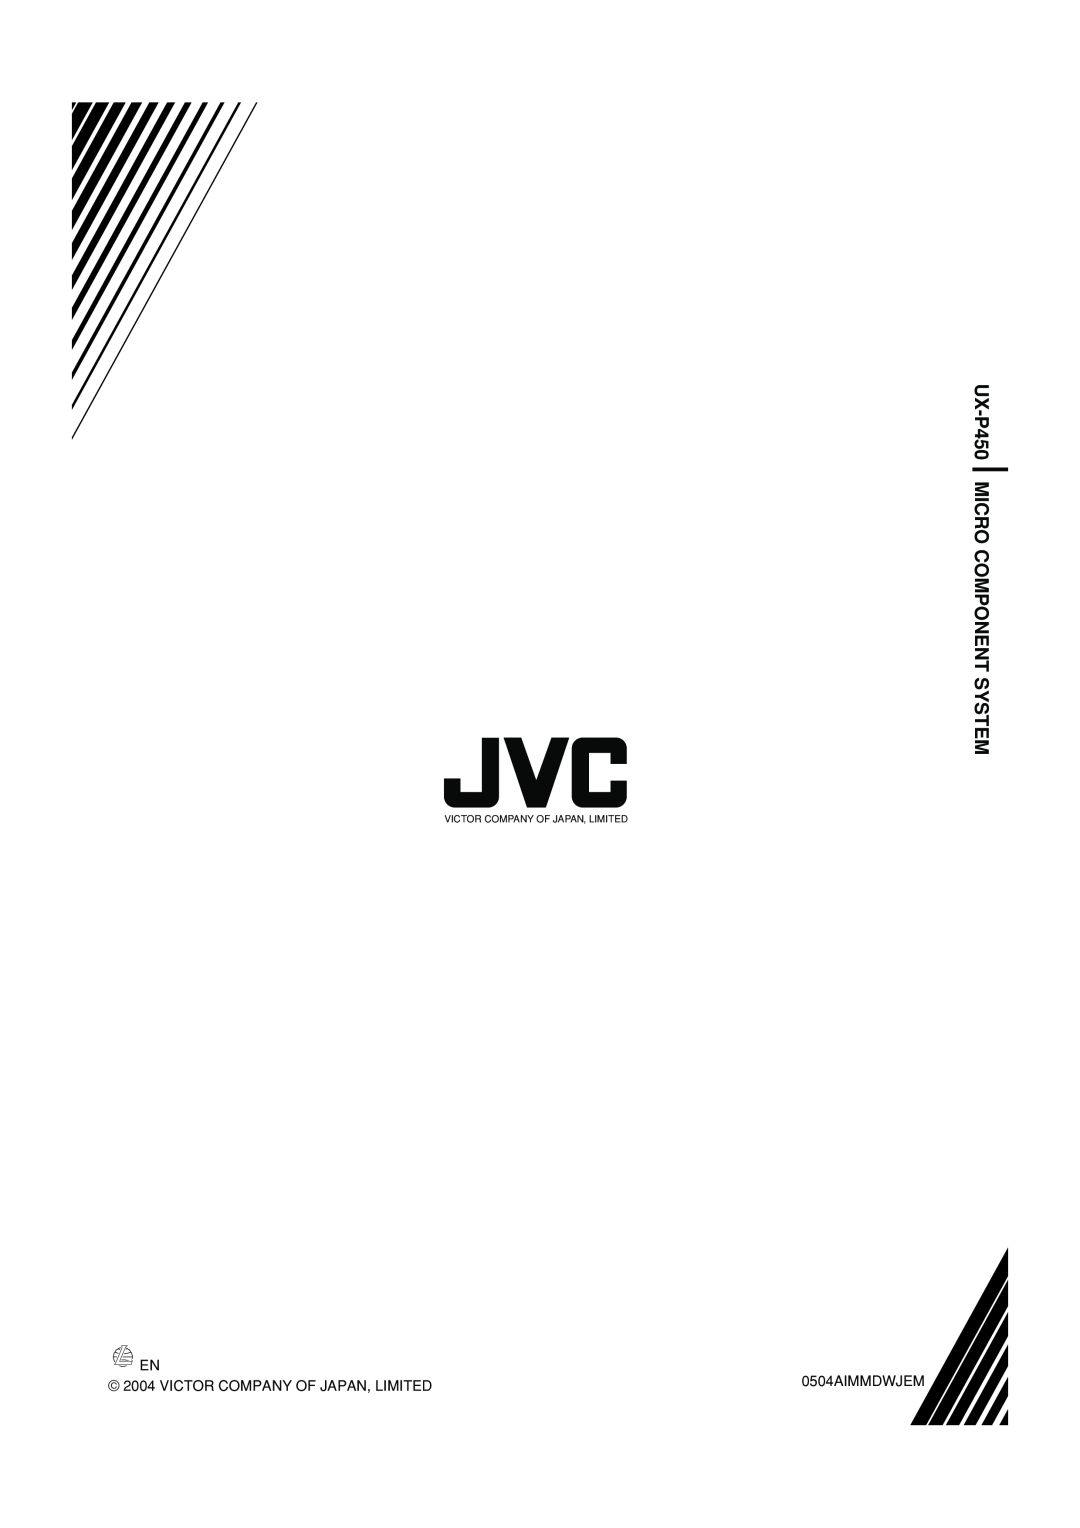 JVC manual UX-P450MICRO COMPONENT SYSTEM, 0504AIMMDWJEM, Victor Company Of Japan, Limited 